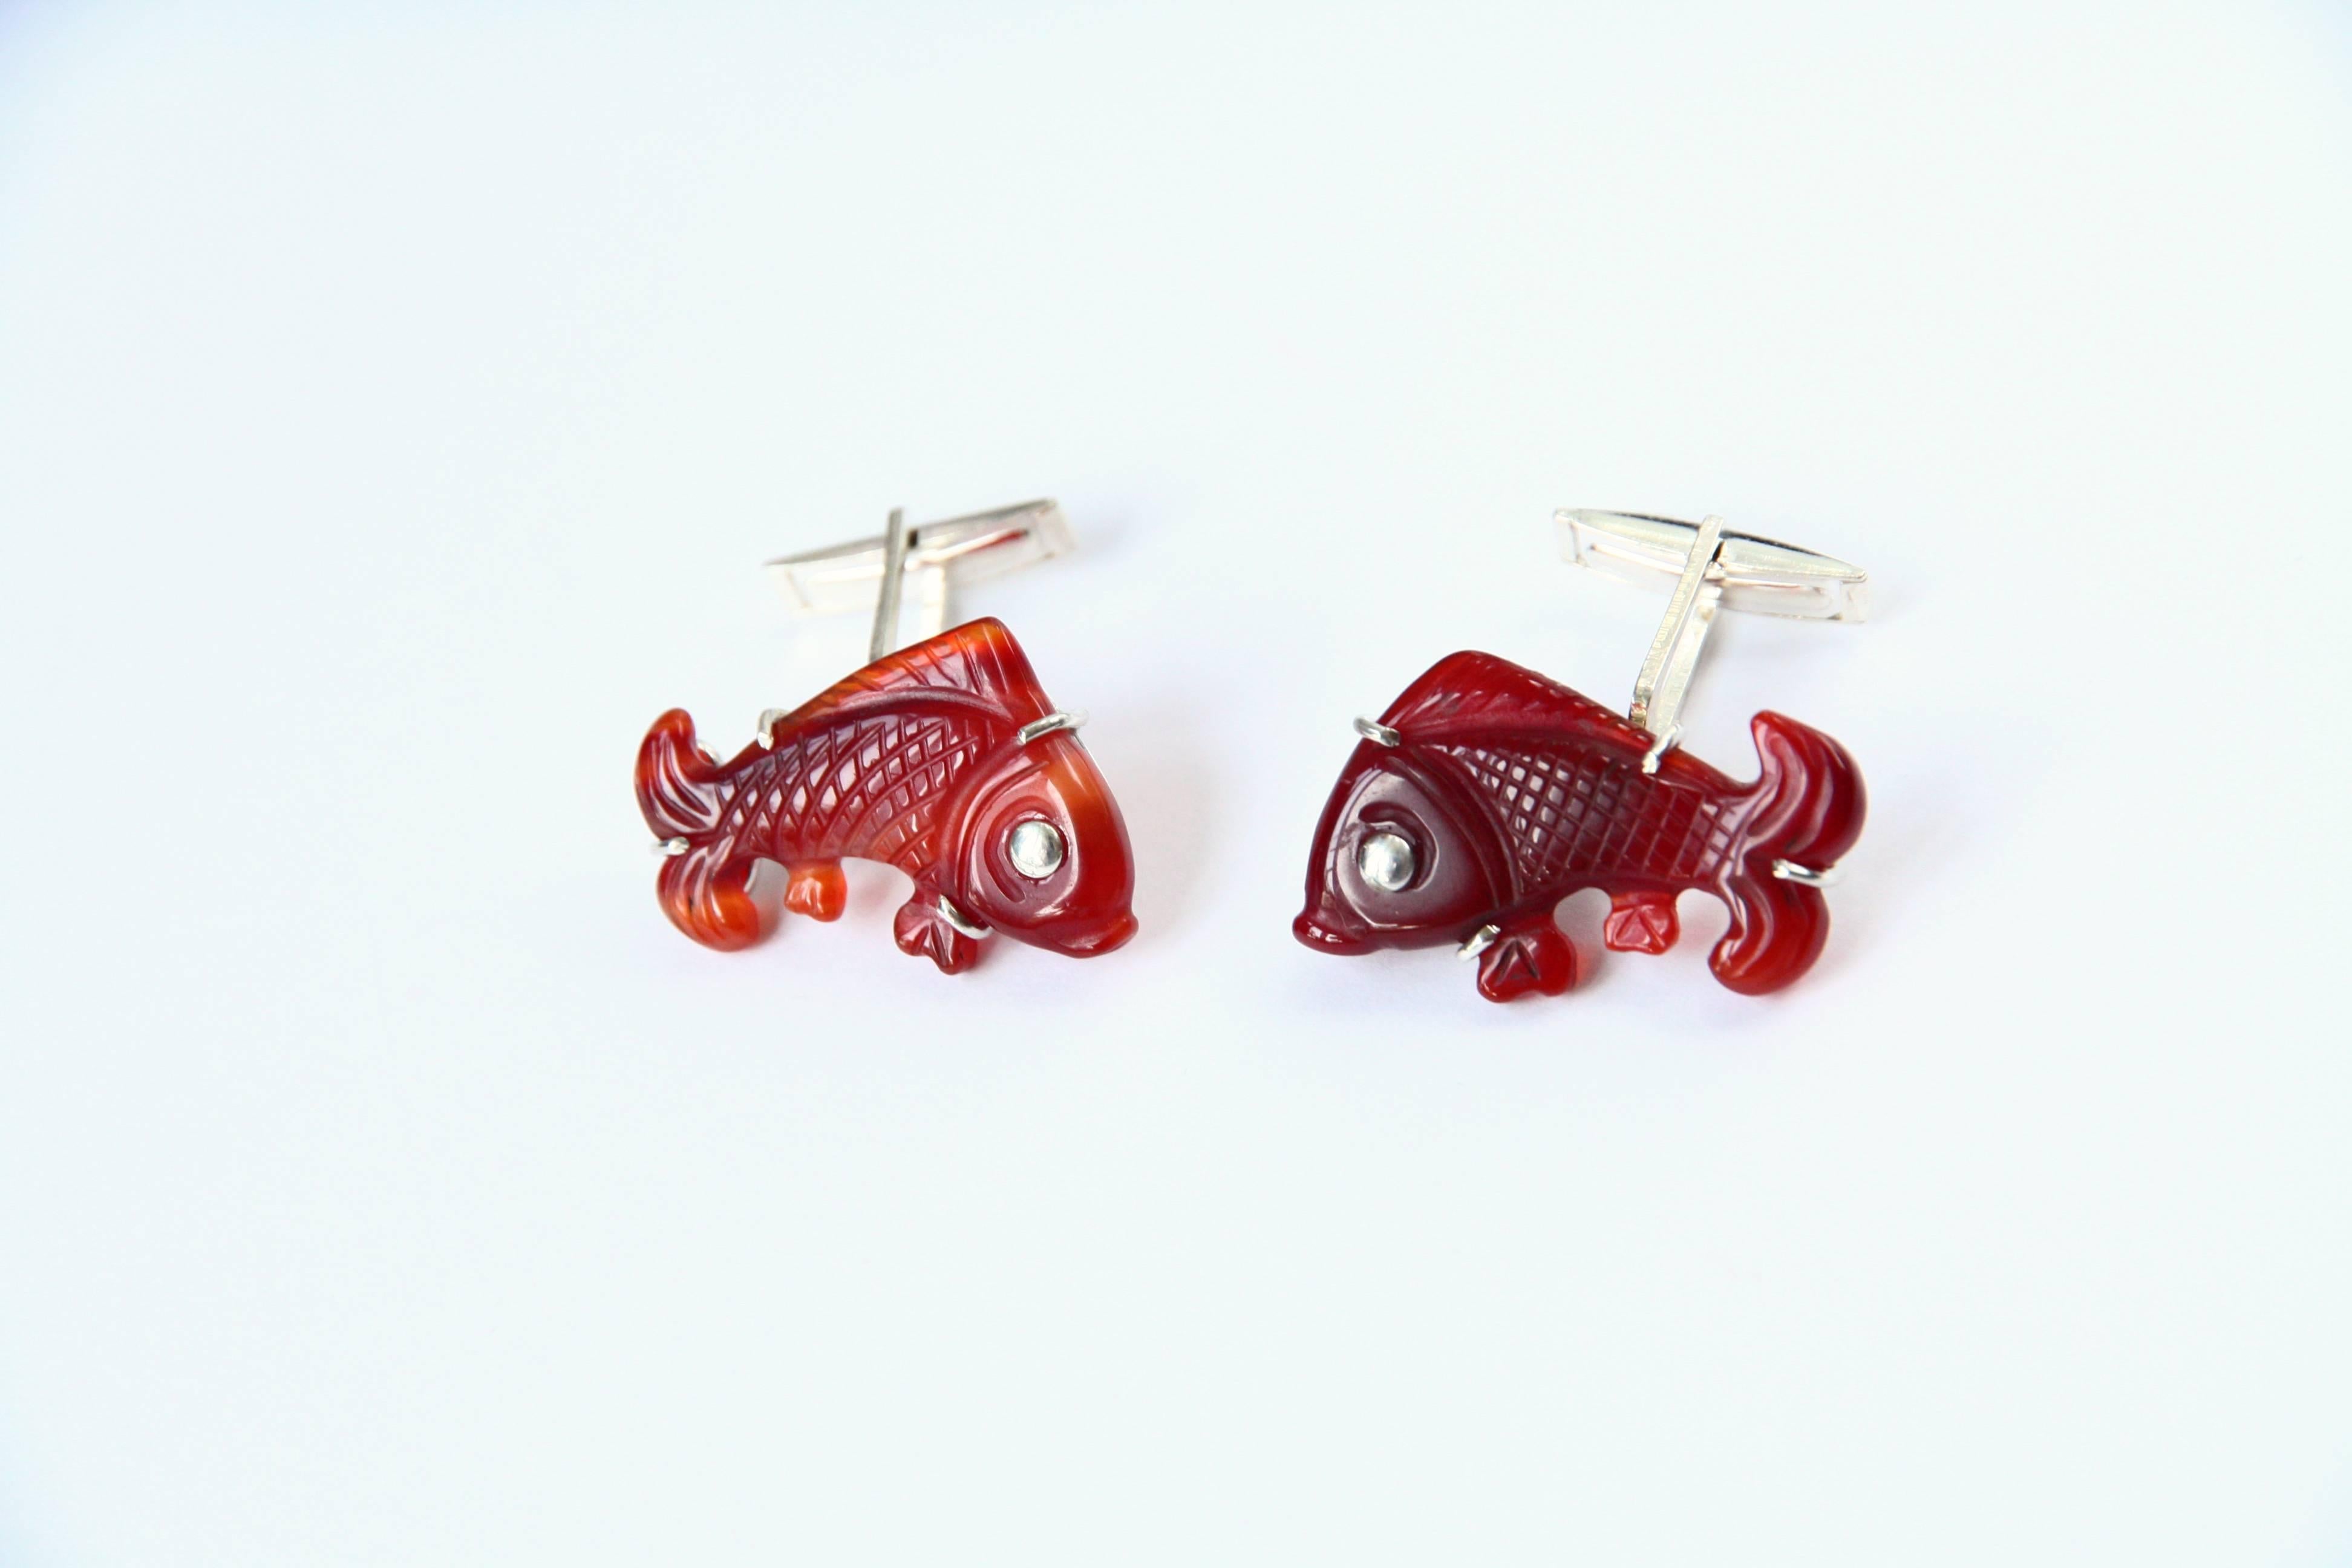 Very special carved antiques Chinese carnelian fish shape linked in Silver gr. 4,80.
All Giulia Colussi jewelry is new and has never been previously owned or worn. Each item will arrive at your door beautifully gift wrapped in our boxes, put inside